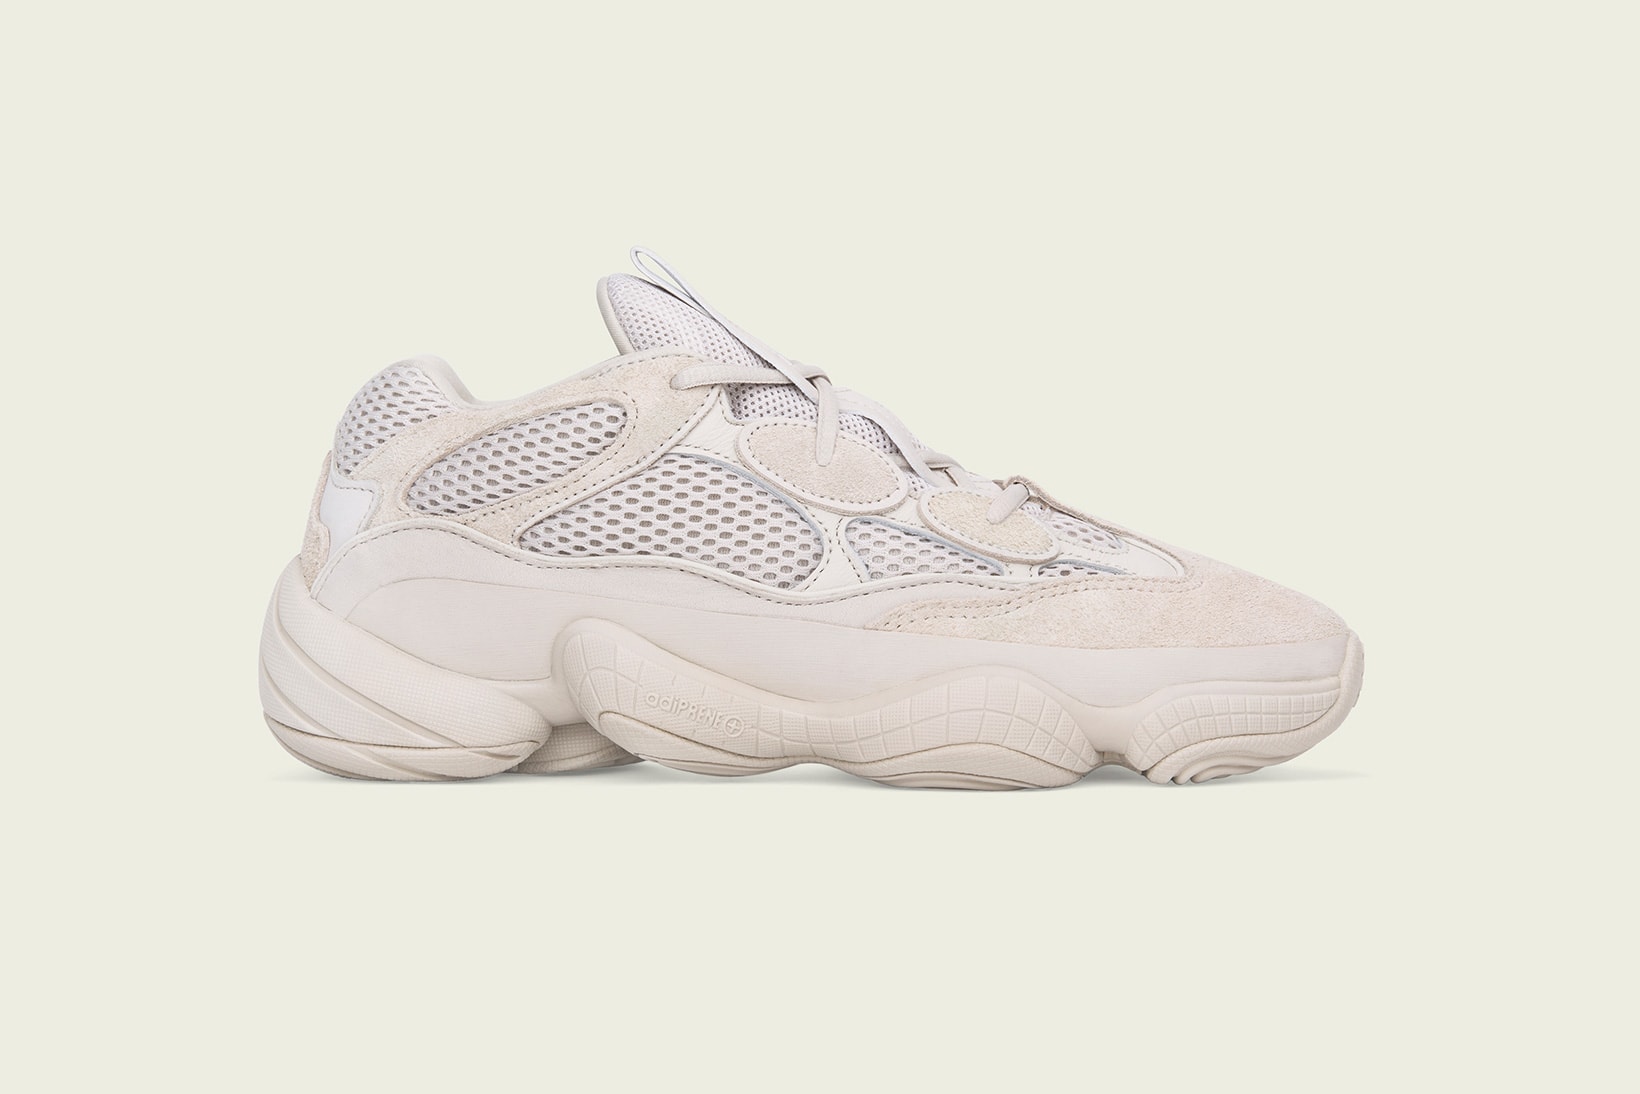 adidas YEEZY 500 Blush Store List footwear 2018 april Kanye West sneakers release date info information 14 supply originals